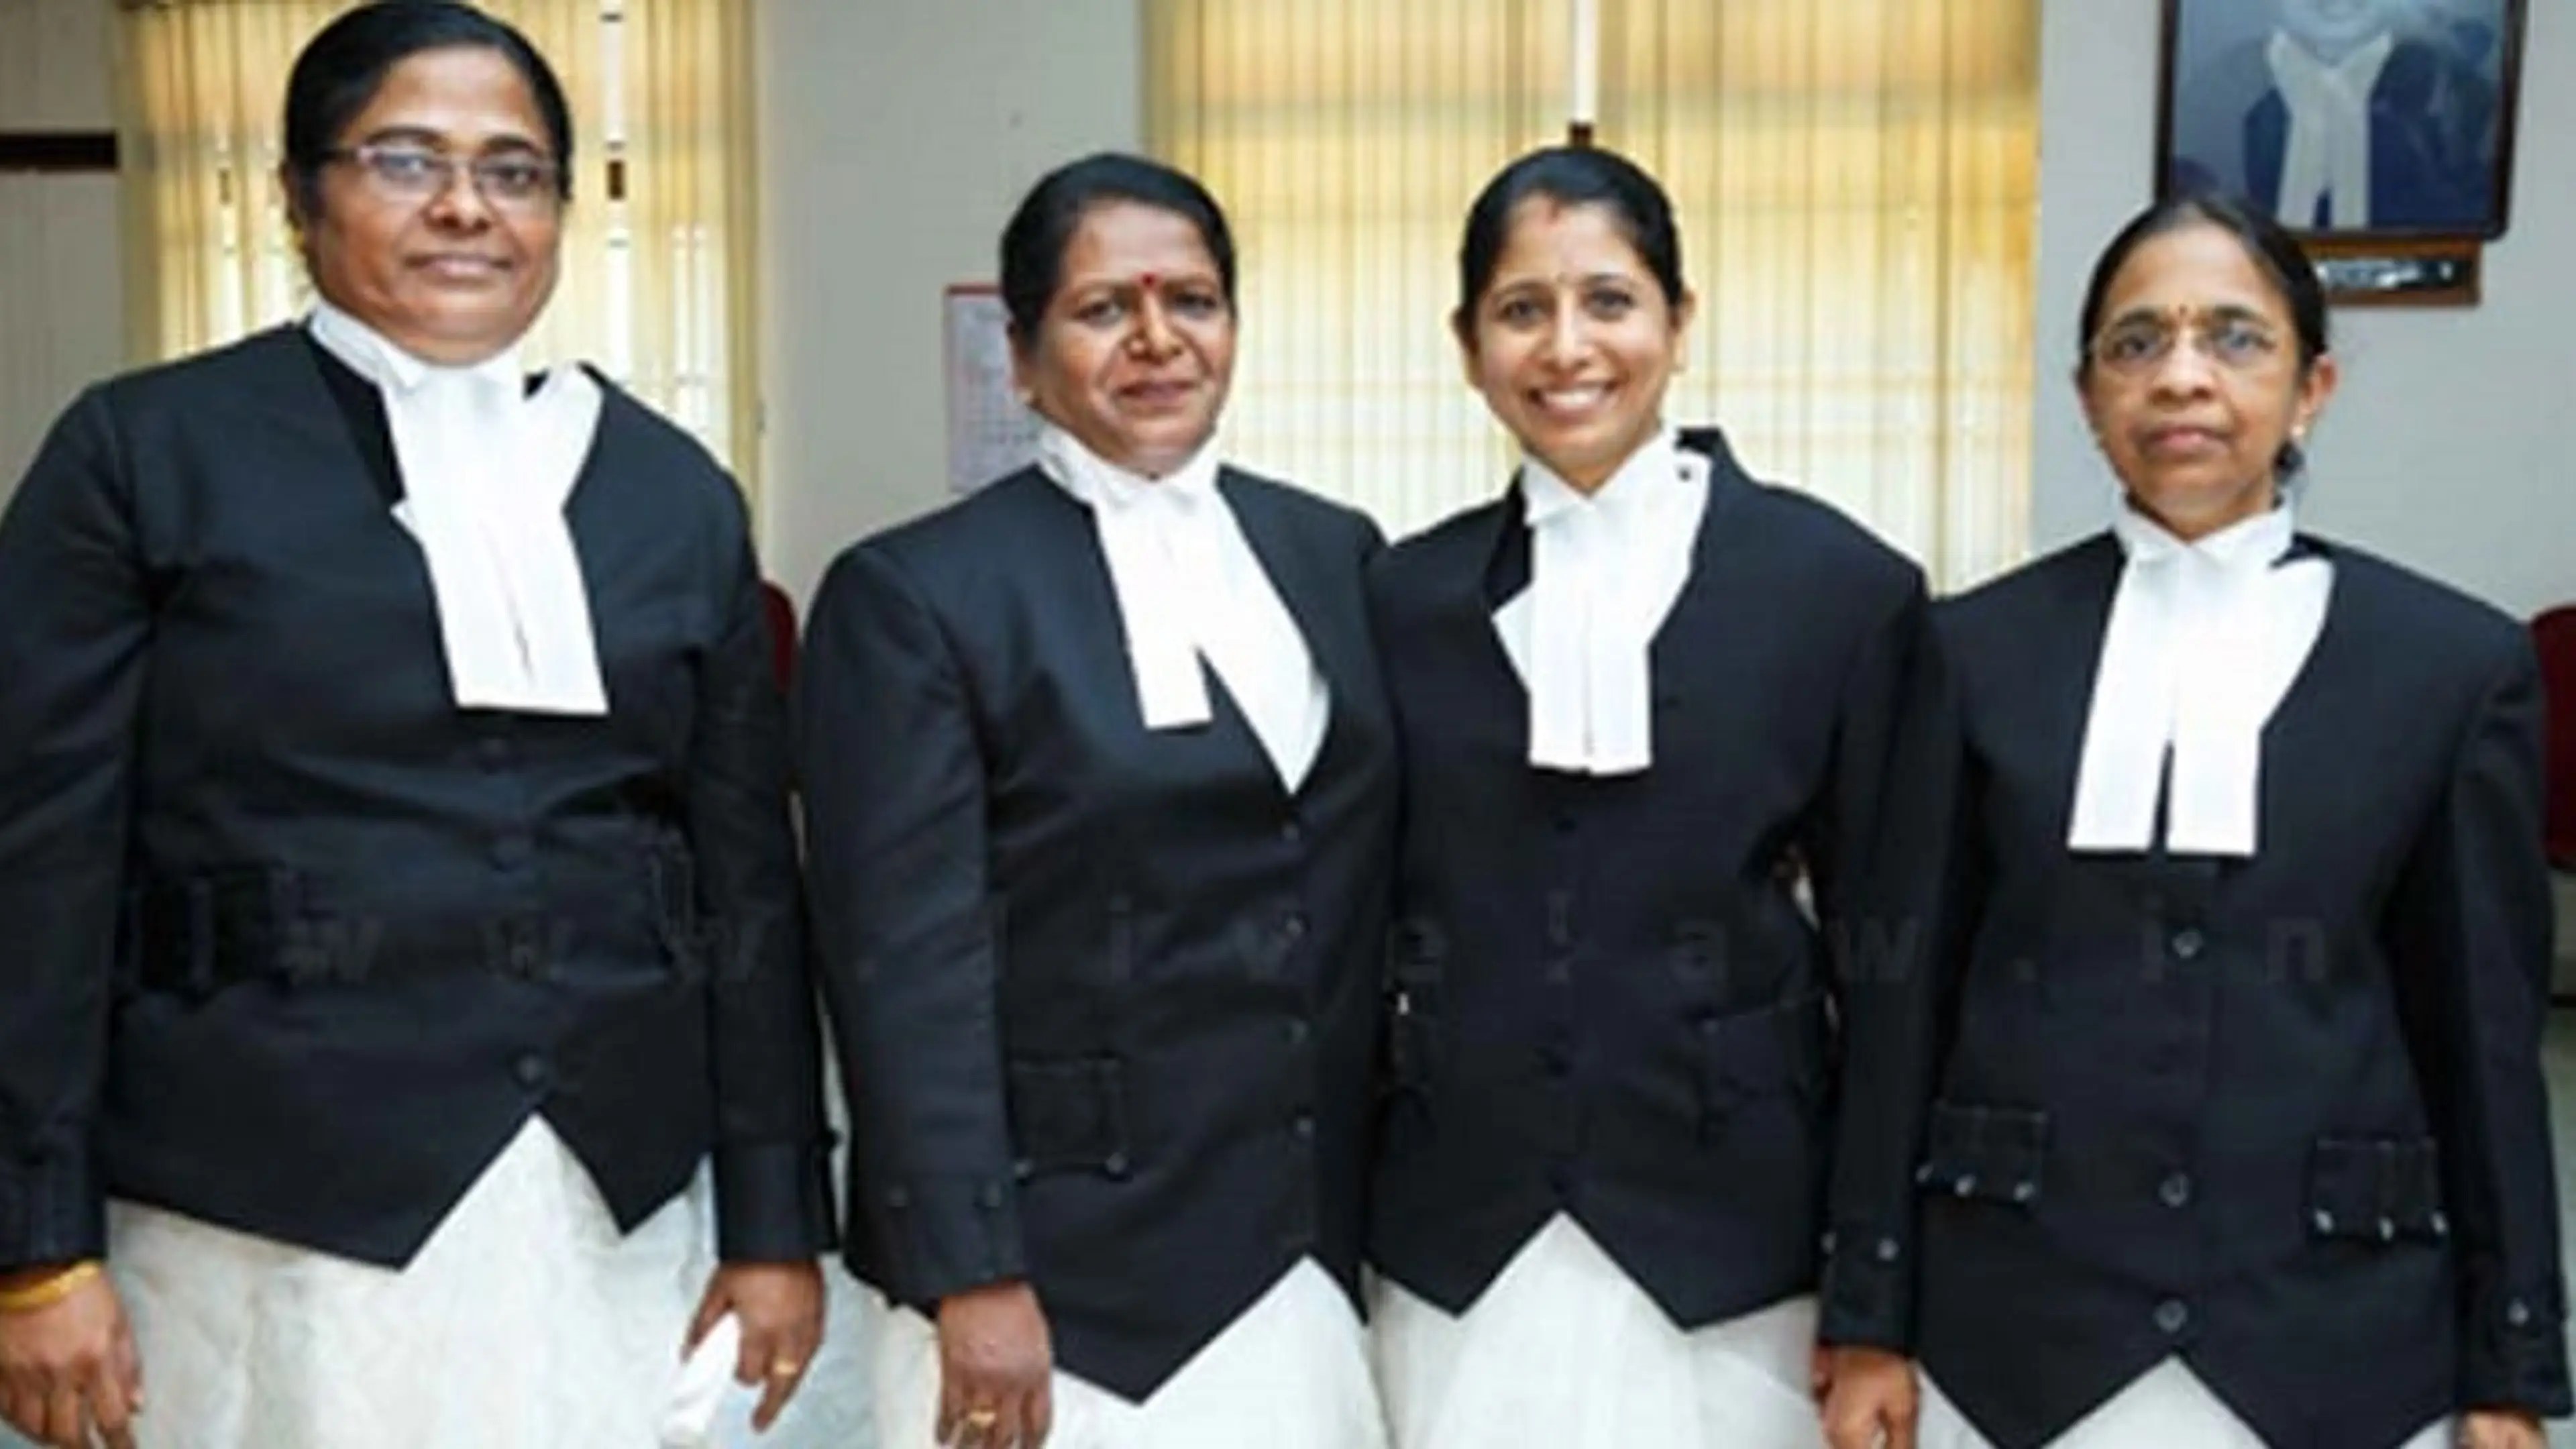 In a historic move, Kerala High Court gets 4 women judges